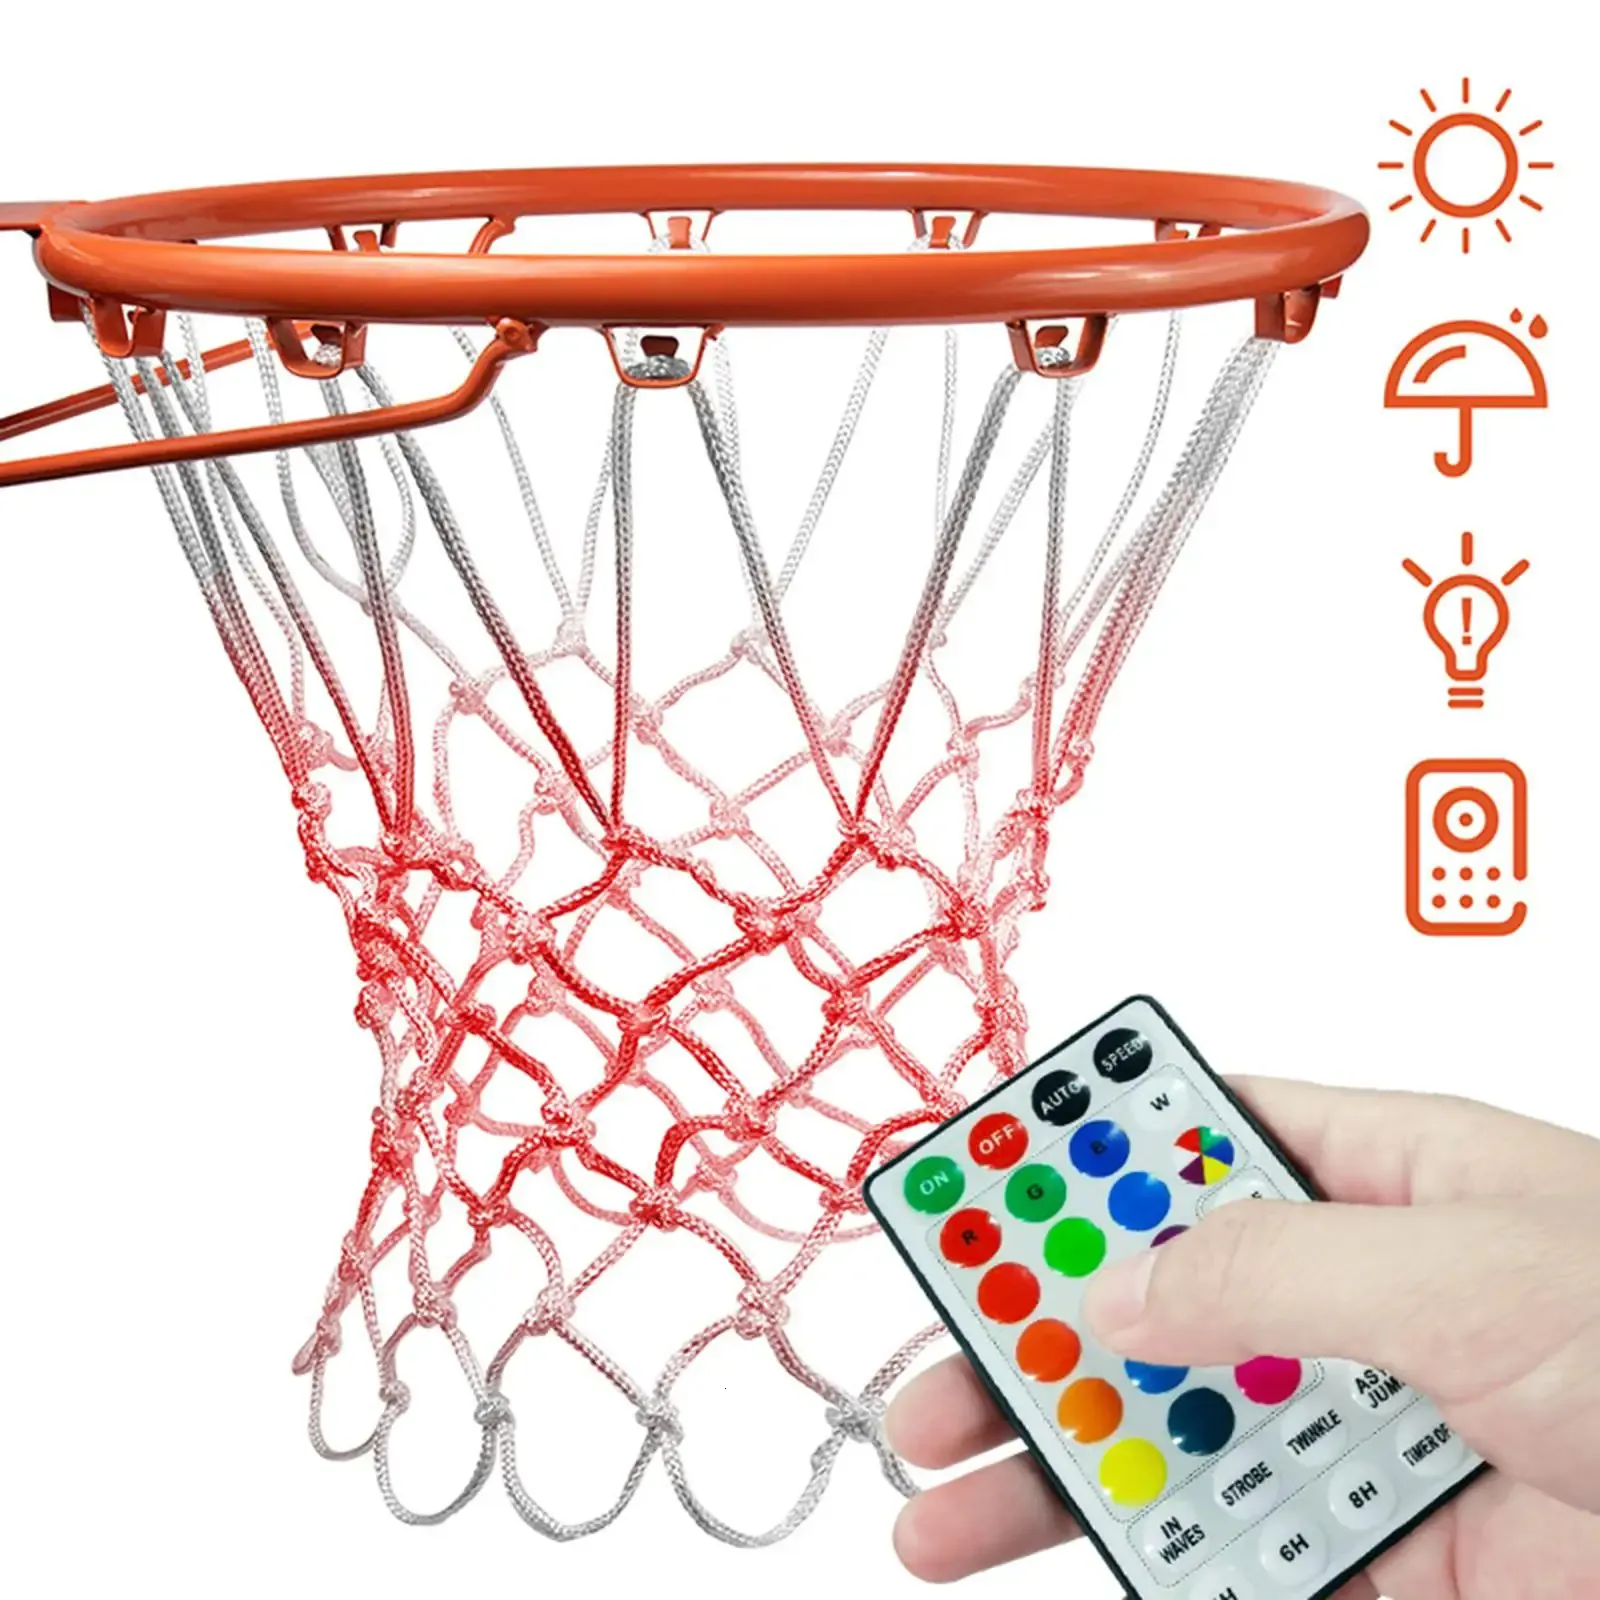 LED Light Basketball Net Change Play Automatic Lights for Outdoor Teen